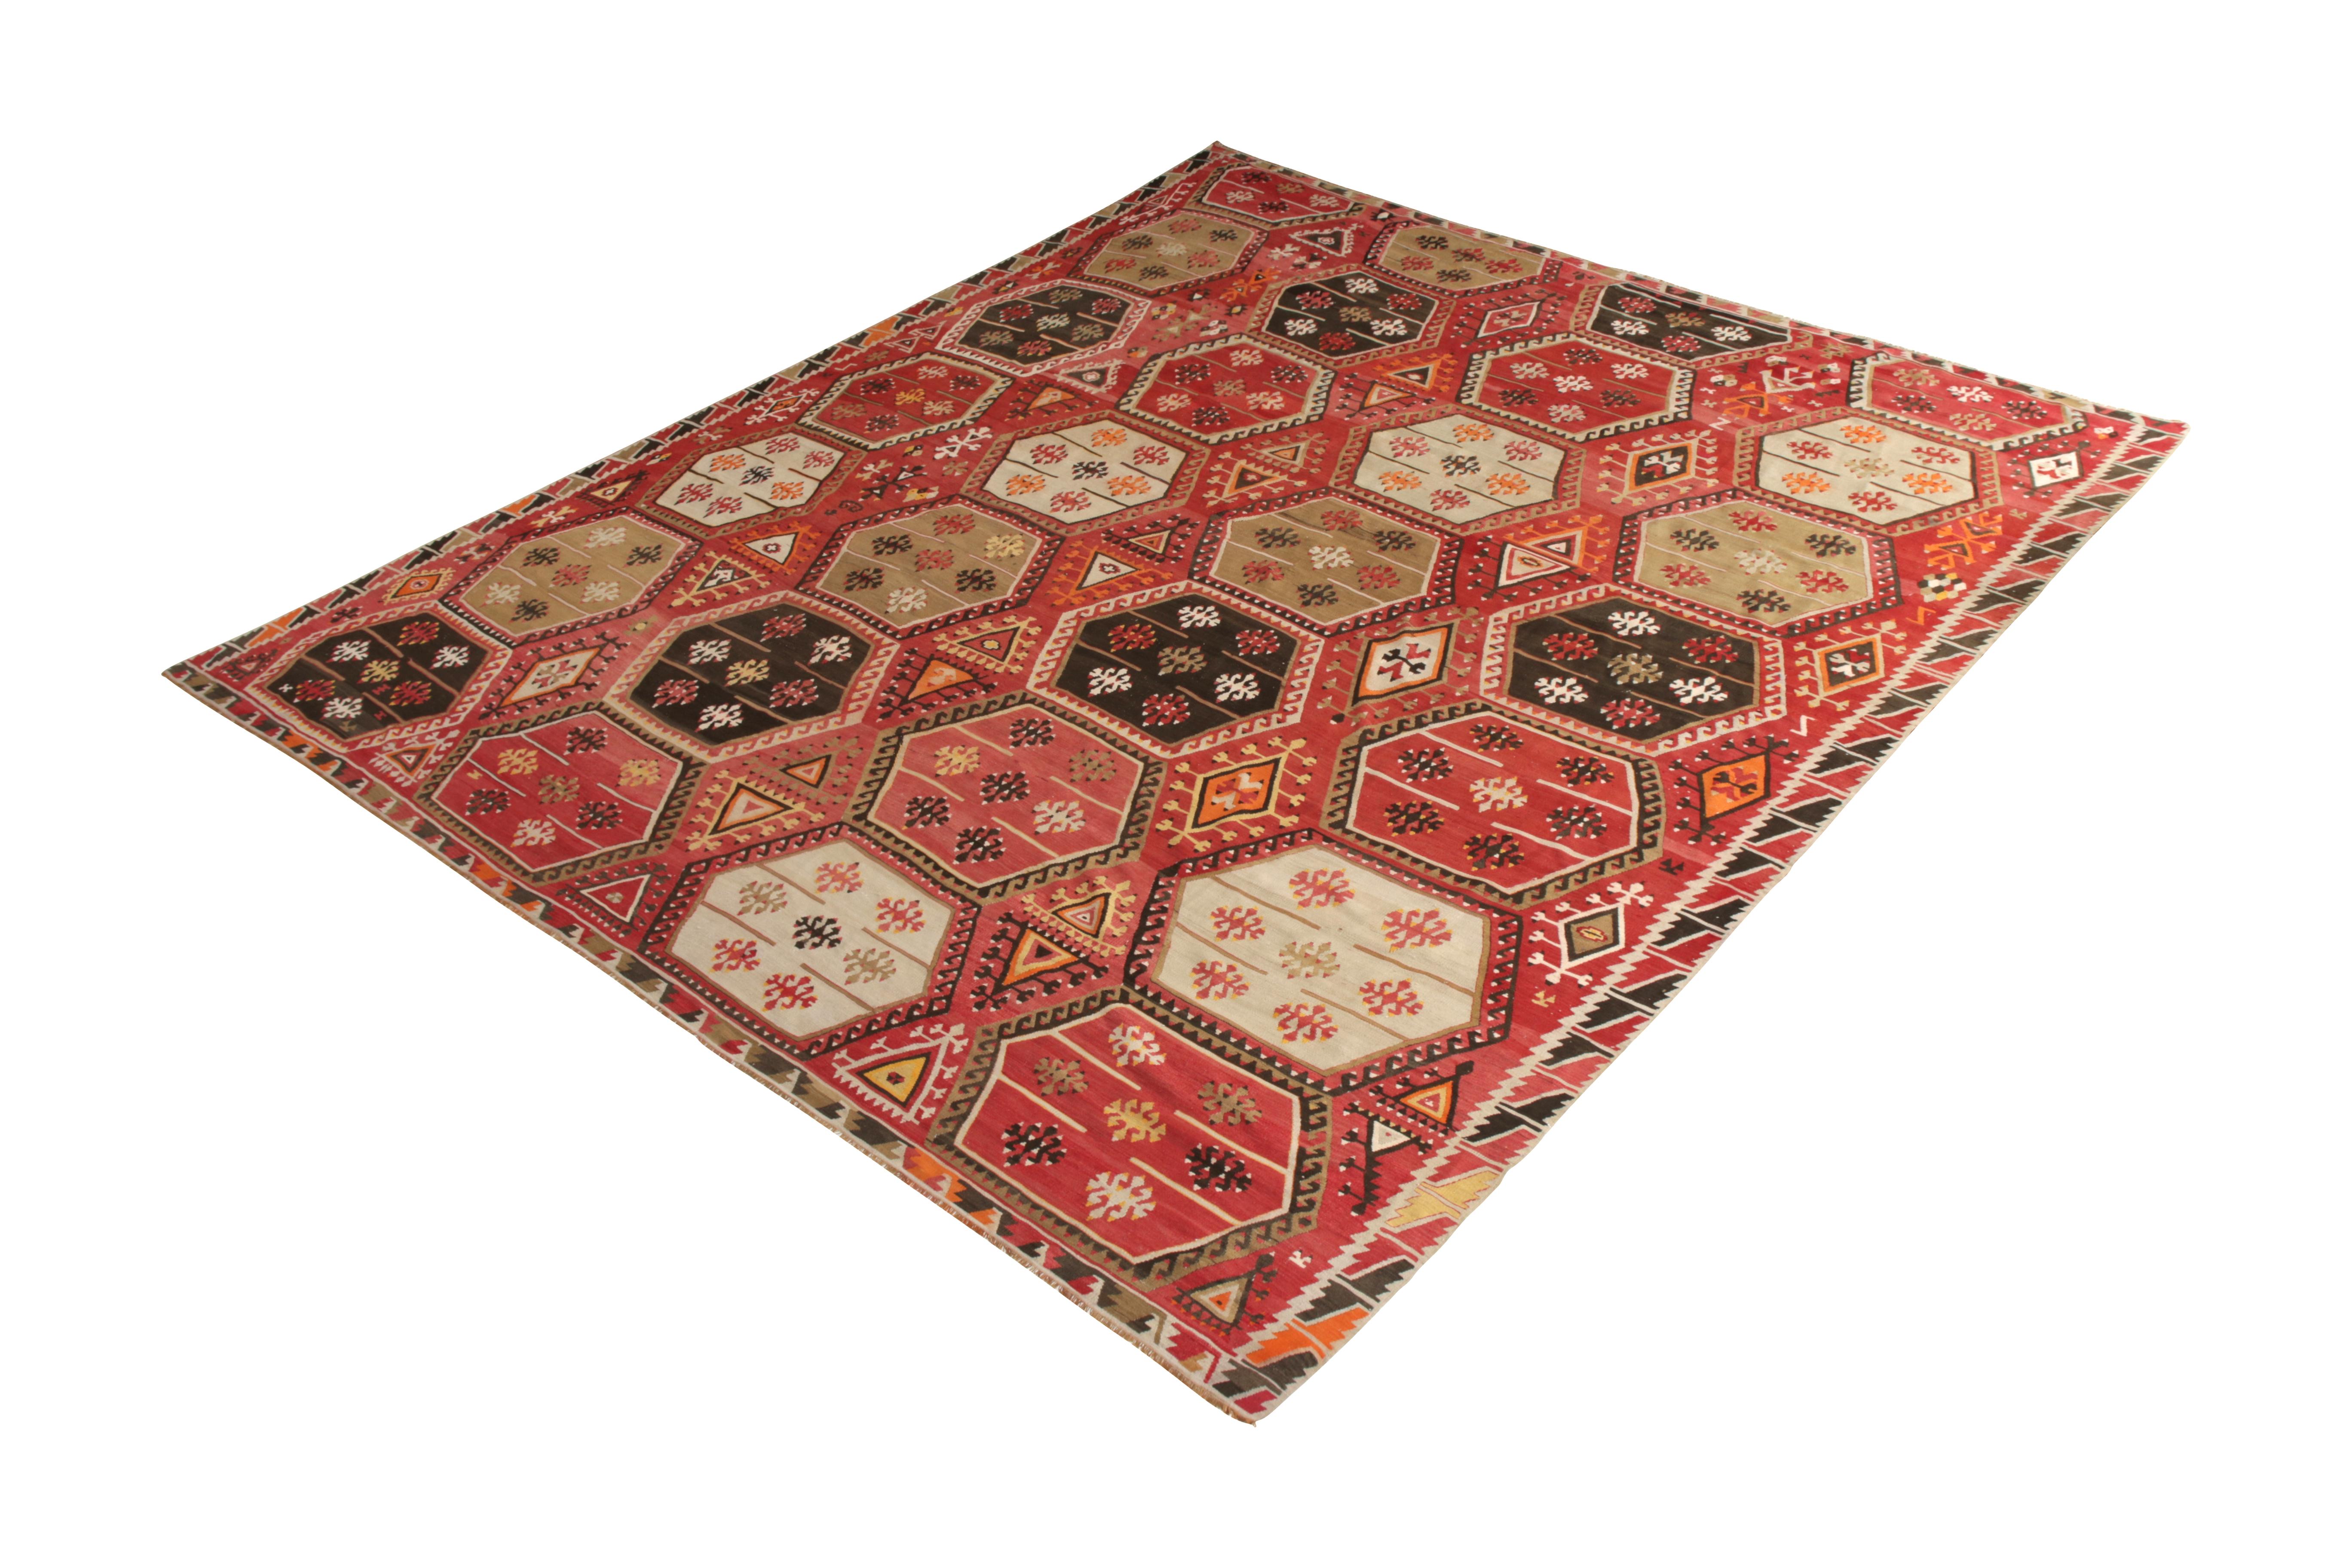 Handmade in flat-woven wool originating from Turkey circa 1950-1960, this midcentury rug is a vintage Kilim rug of a unique graph and distinctive pink-red colorway, complementing bolder blue, green, and black hues in the rows of geometric all-over